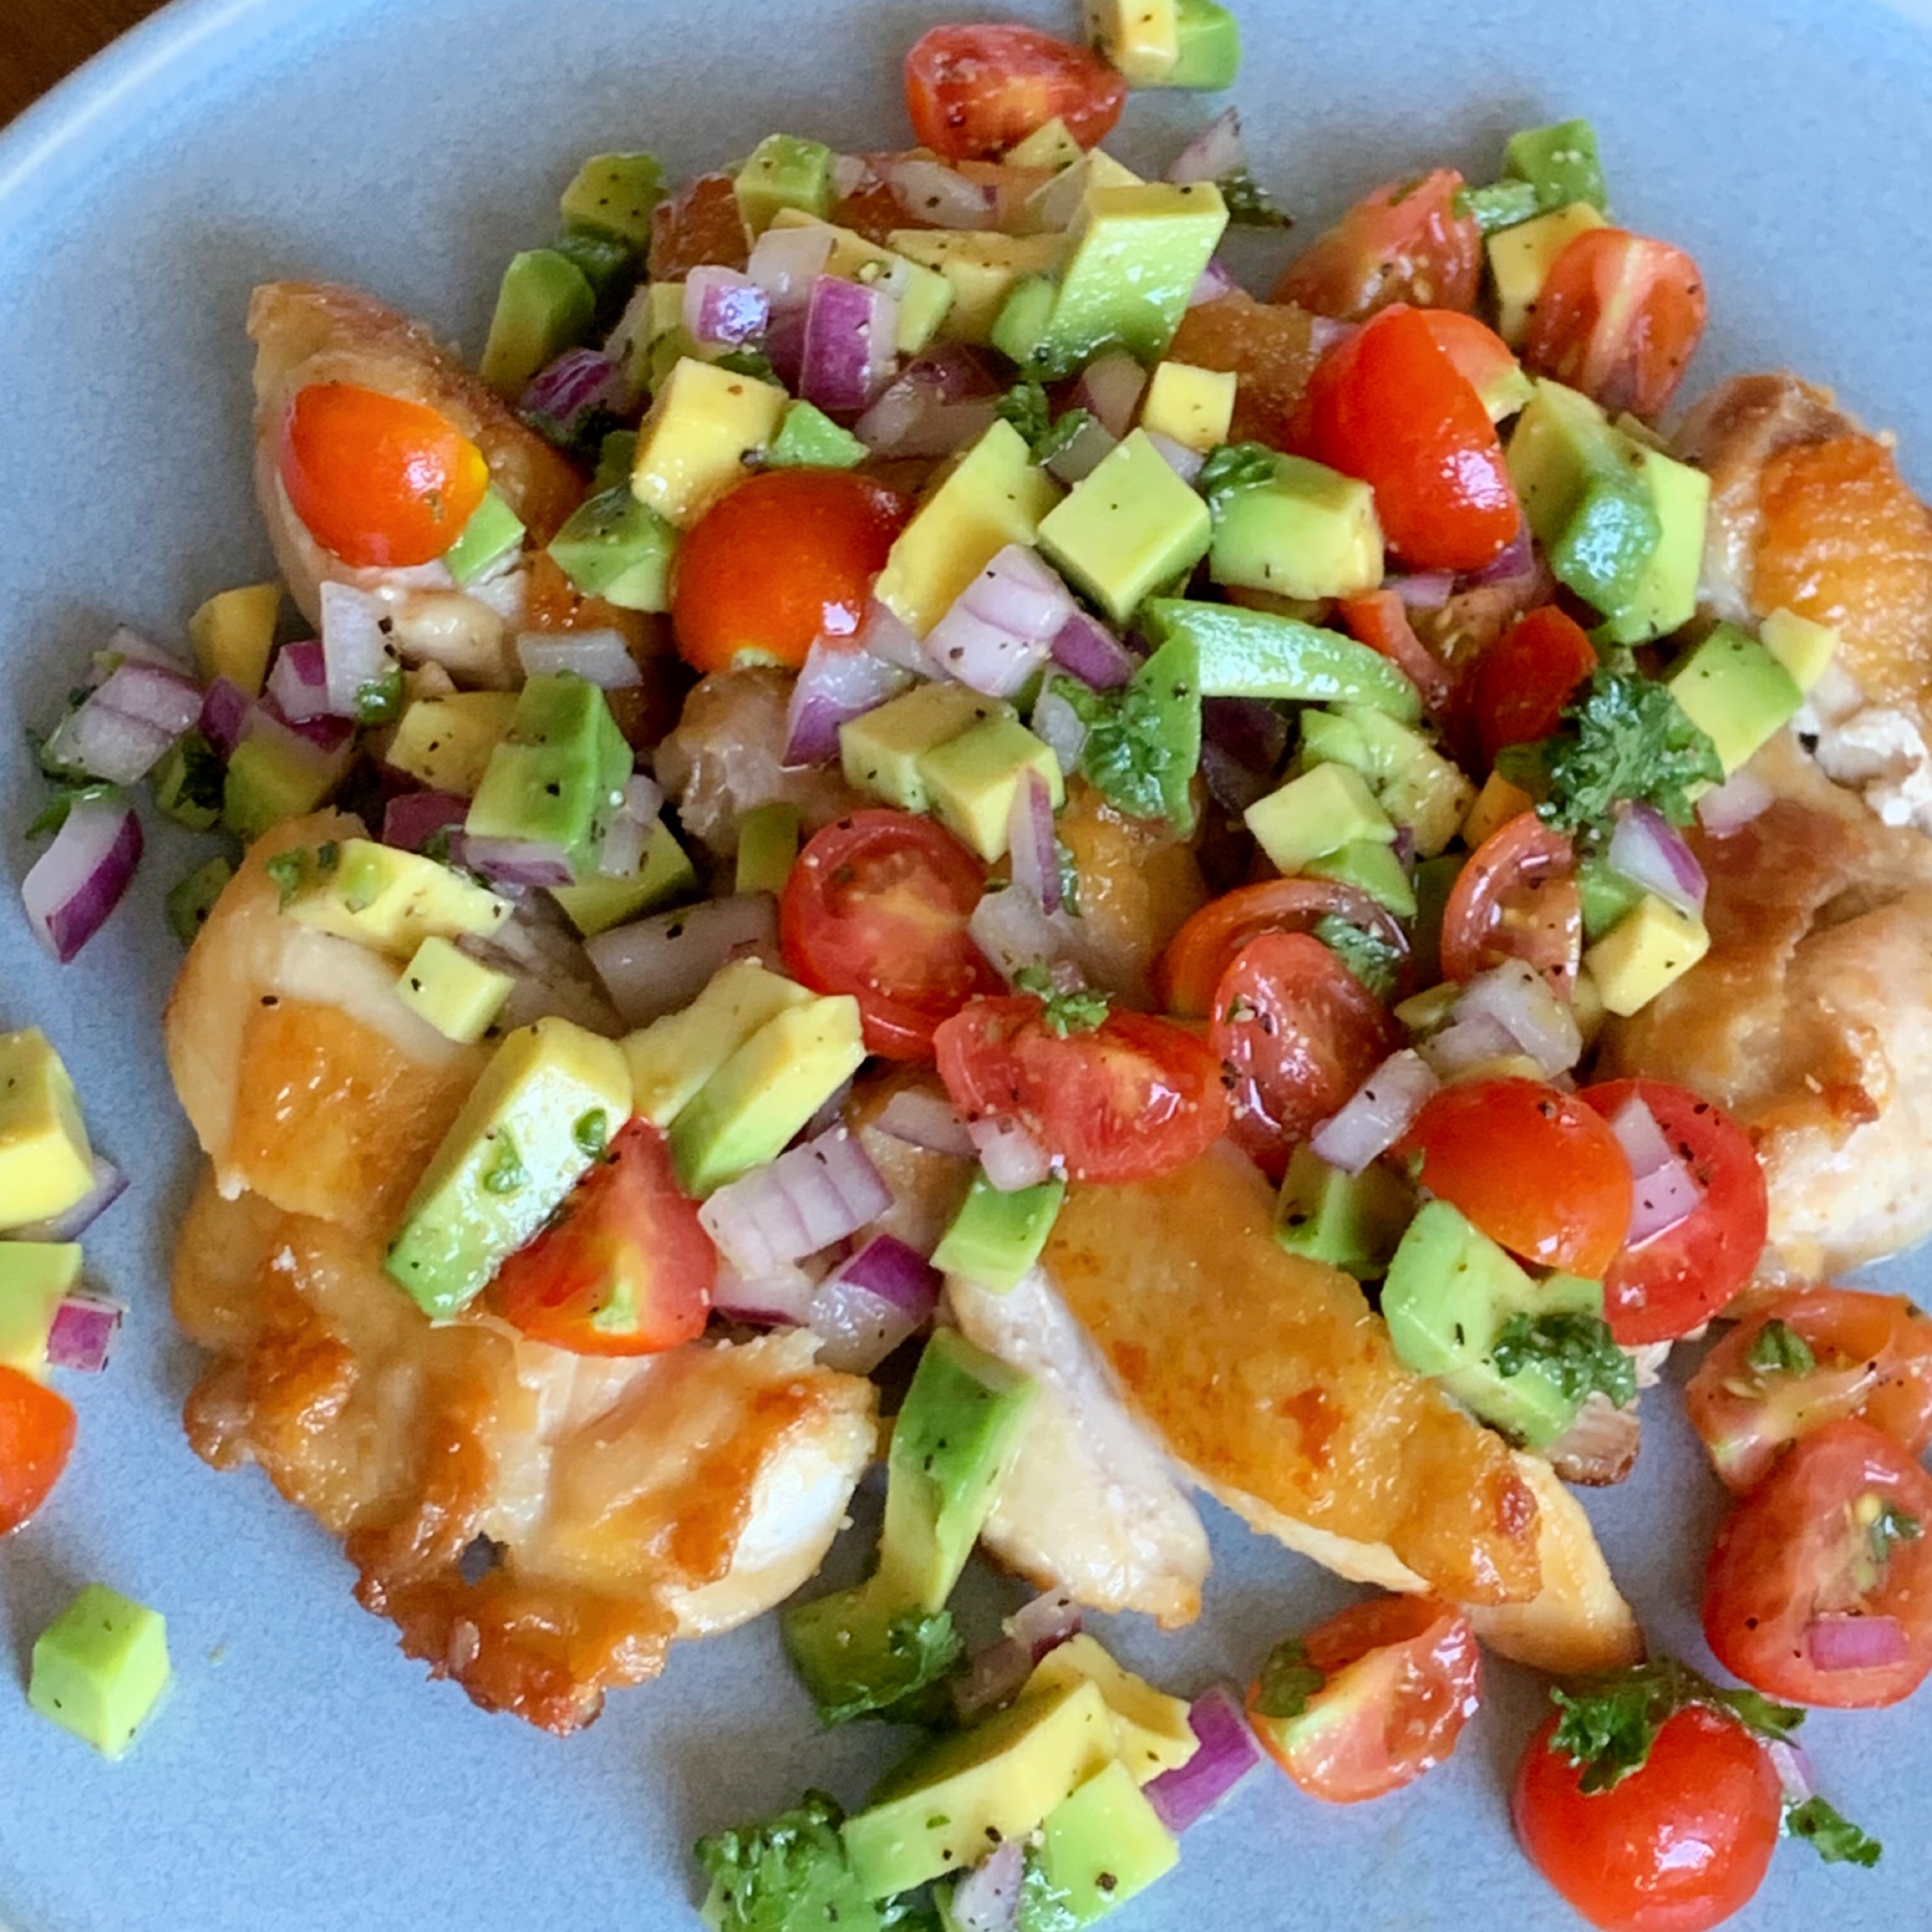 Savory grilled chicken thighs topped with a spicy yet refreshing salsa sauce.